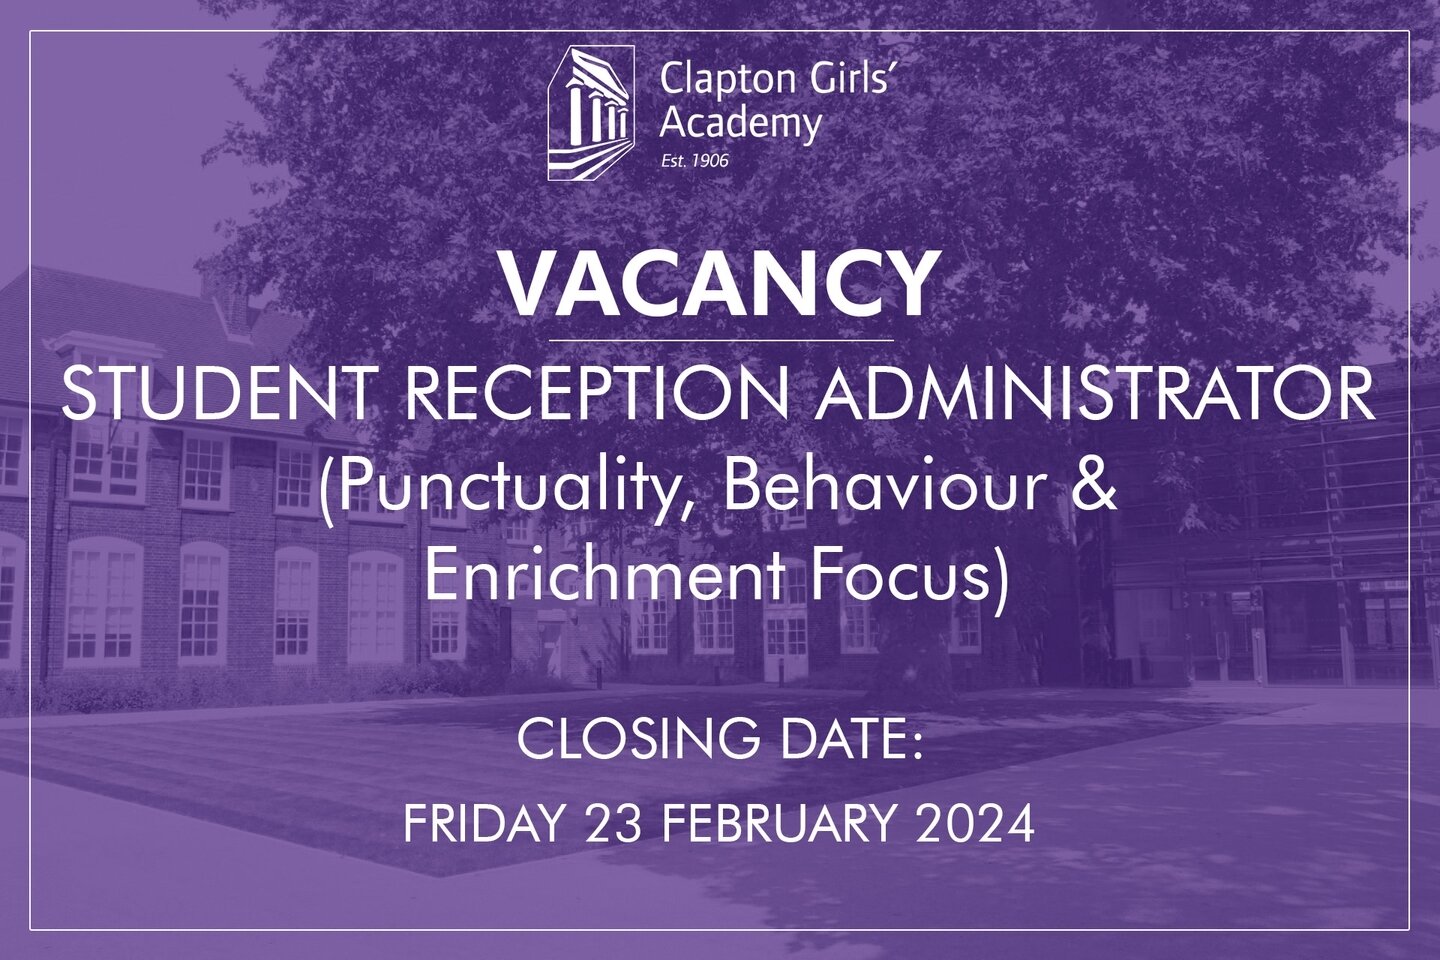 Are you interested in an exciting opportunity to work as part of our student engagement admin support team? Are you creative, flexible and able to work on your own initiative to ensure positive outcomes for students? Then get ready to apply!

⬆️Click